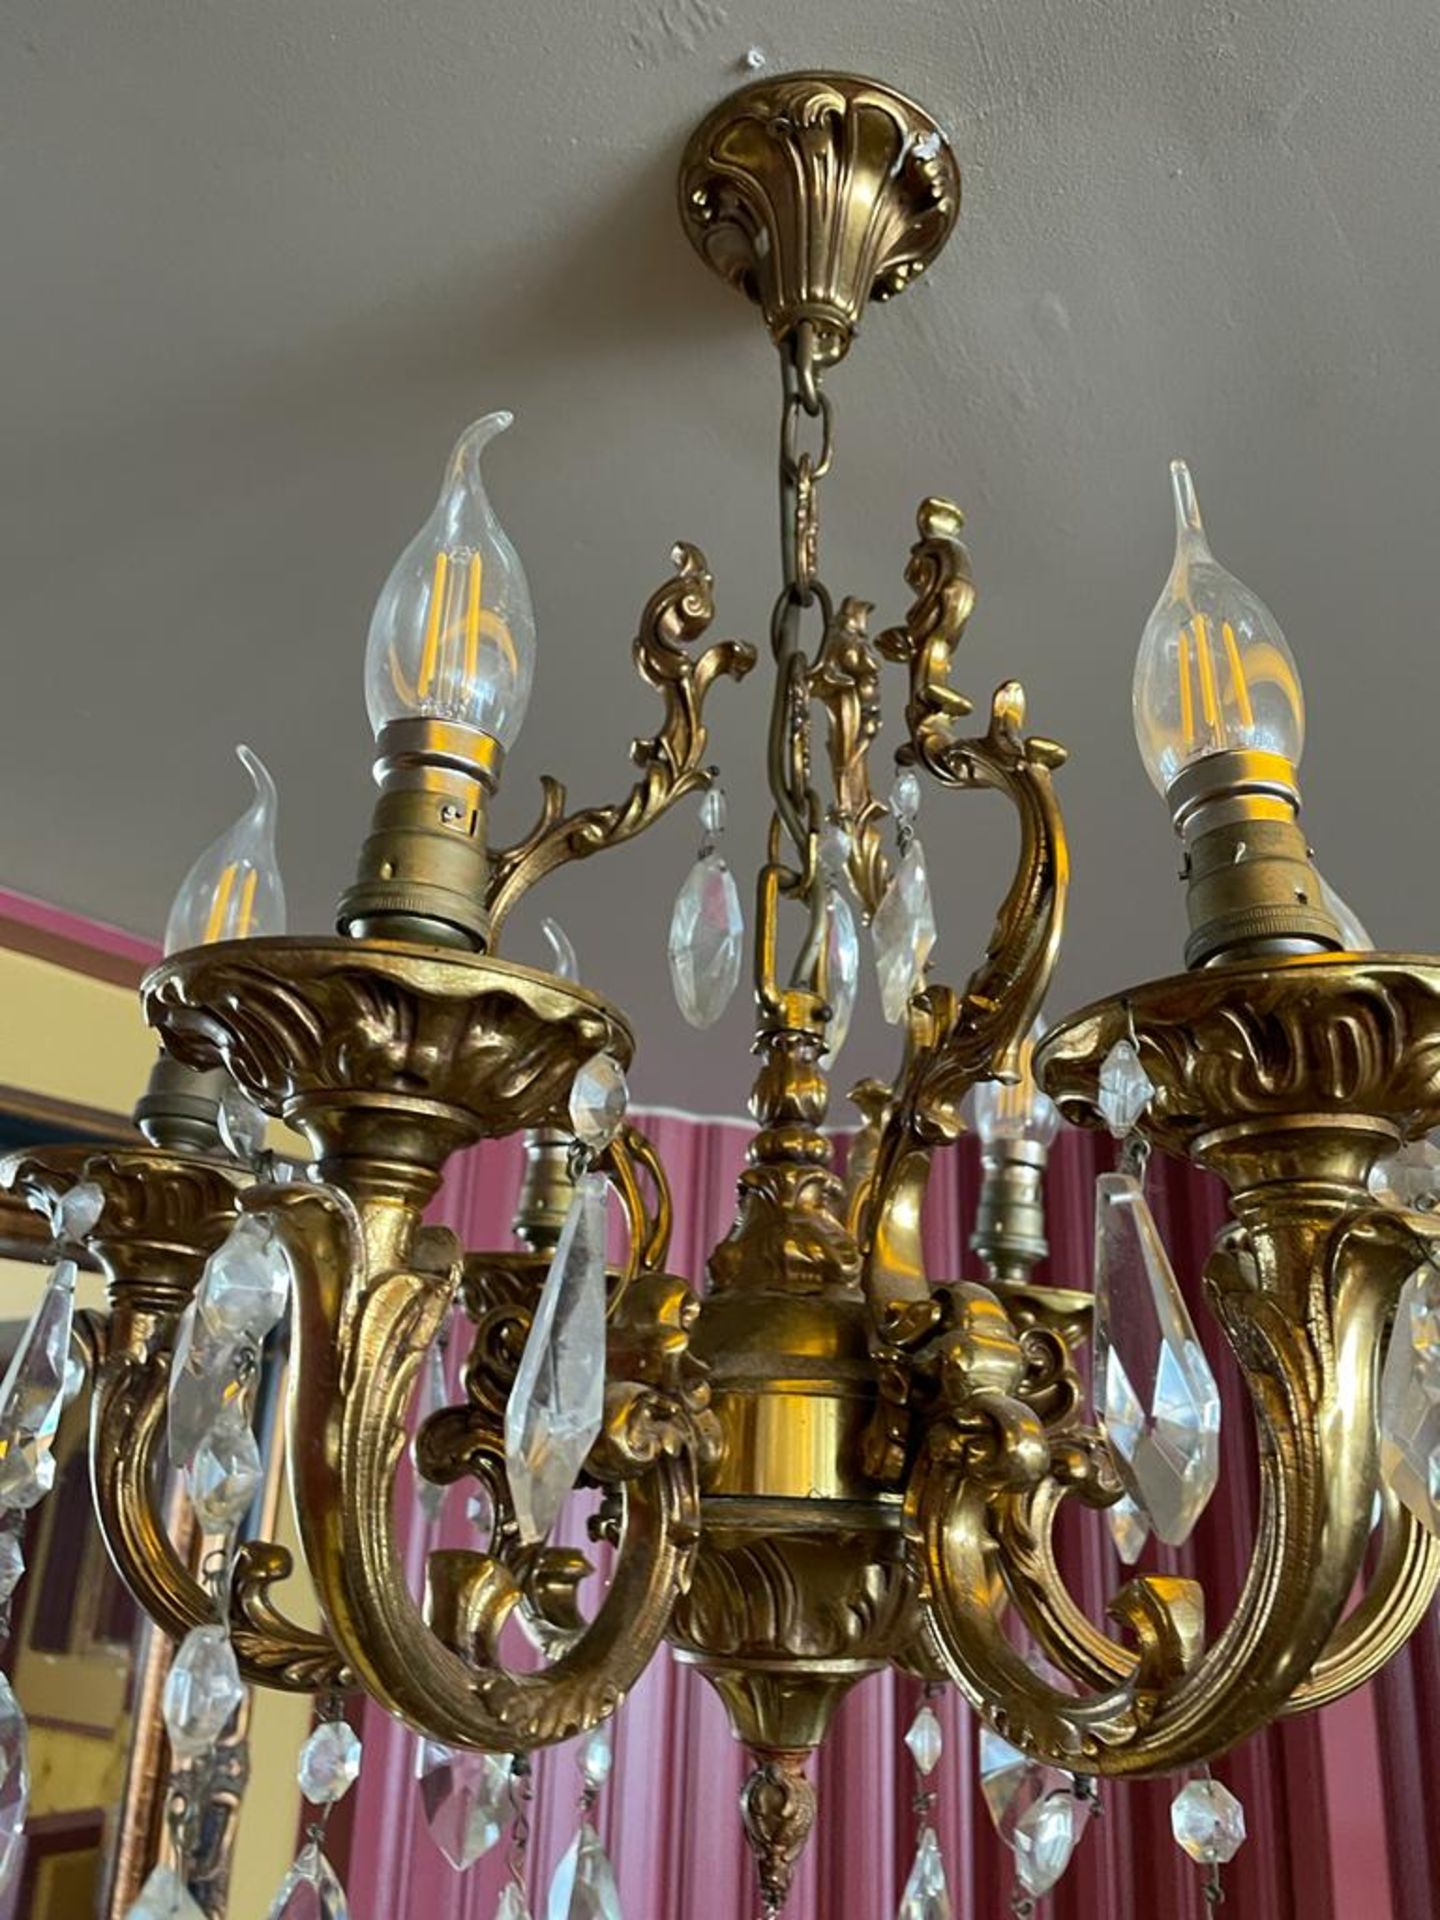 1 x Chandelier With Six Candle Lights - Ref: BK149 - CL686 - Location: Altrincham WA14This lot was - Image 2 of 4